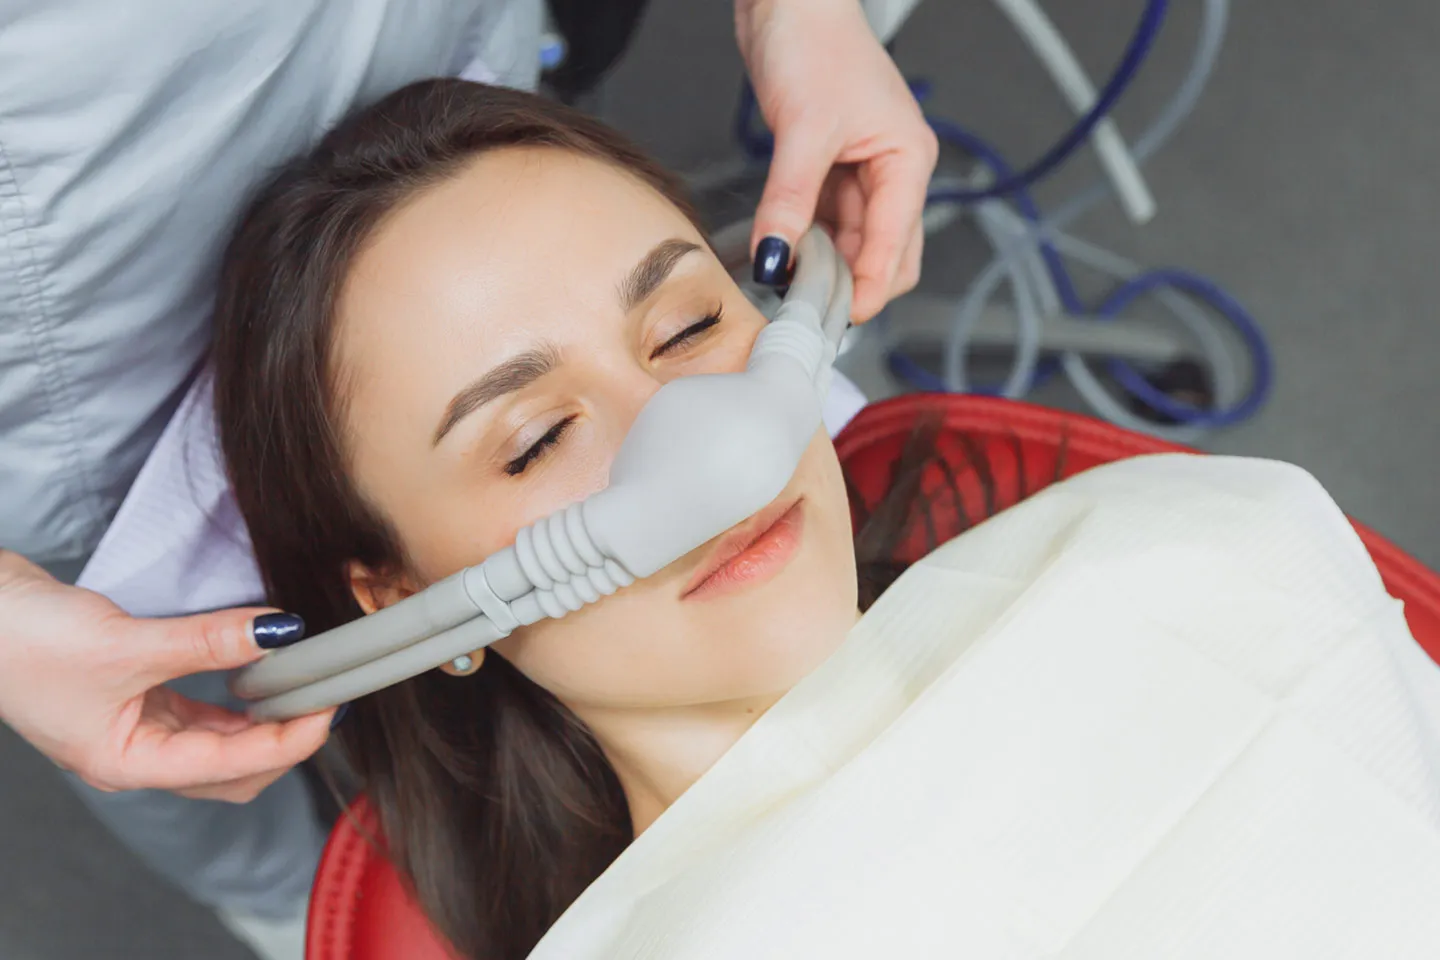 Sedation Dentistry: An Overview of Options for Anxious Patients